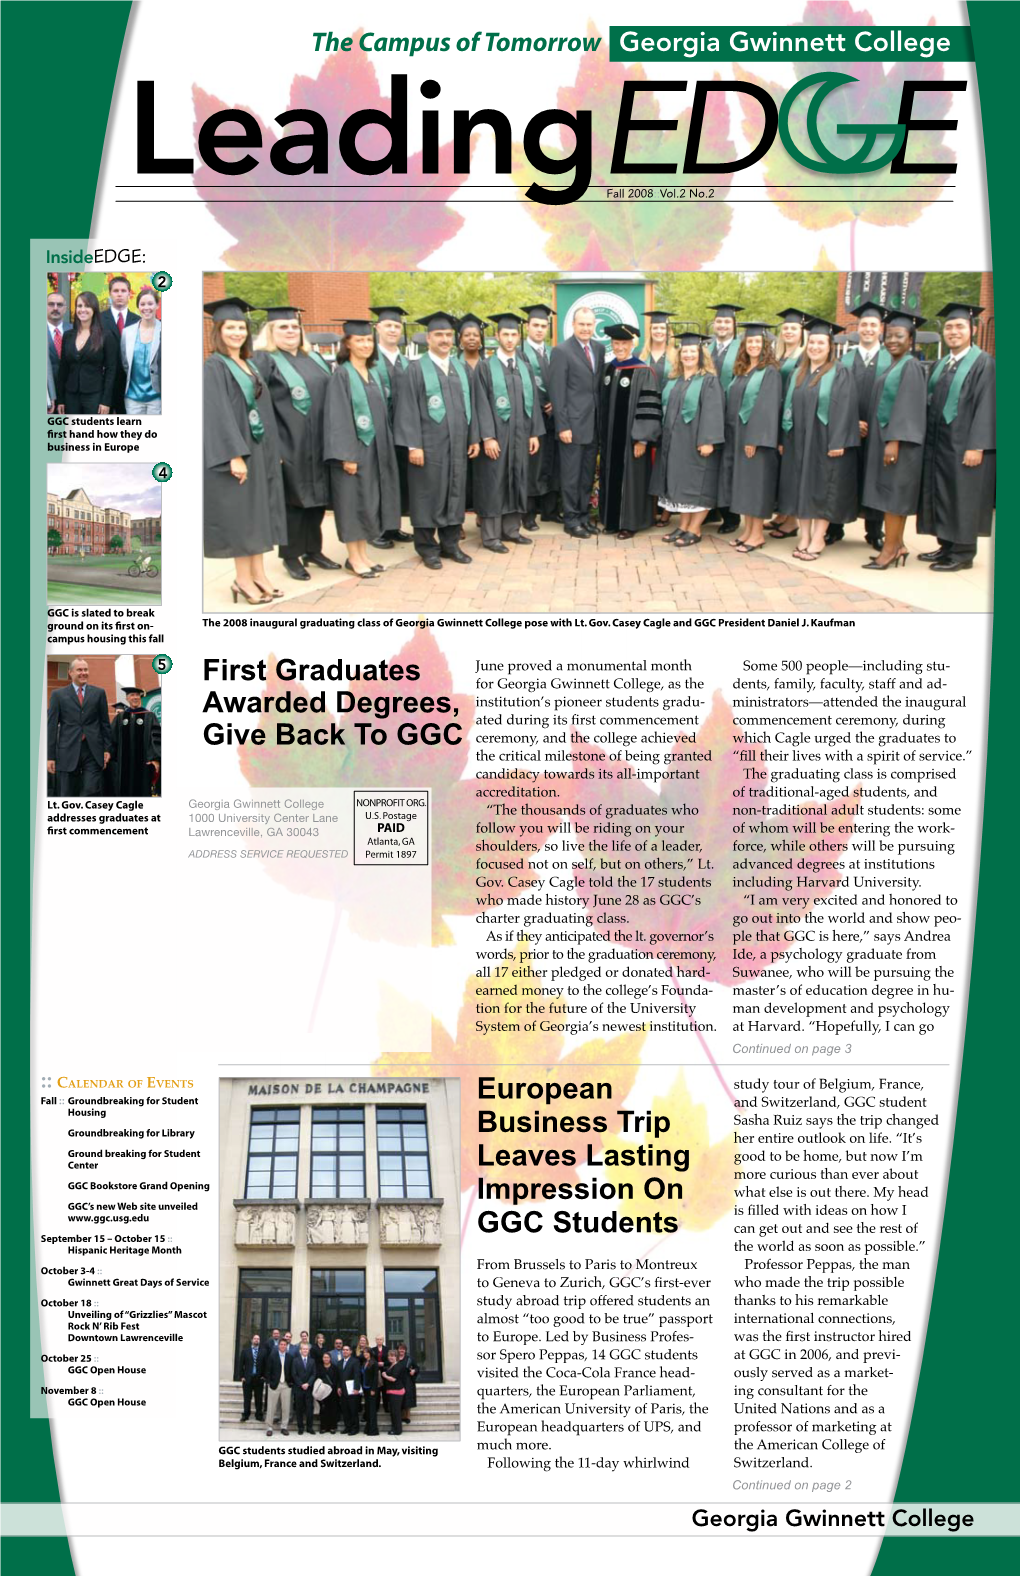 European Business Trip Leaves Lasting Impression on GGC Students First Graduates Awarded Degrees, Give Back To